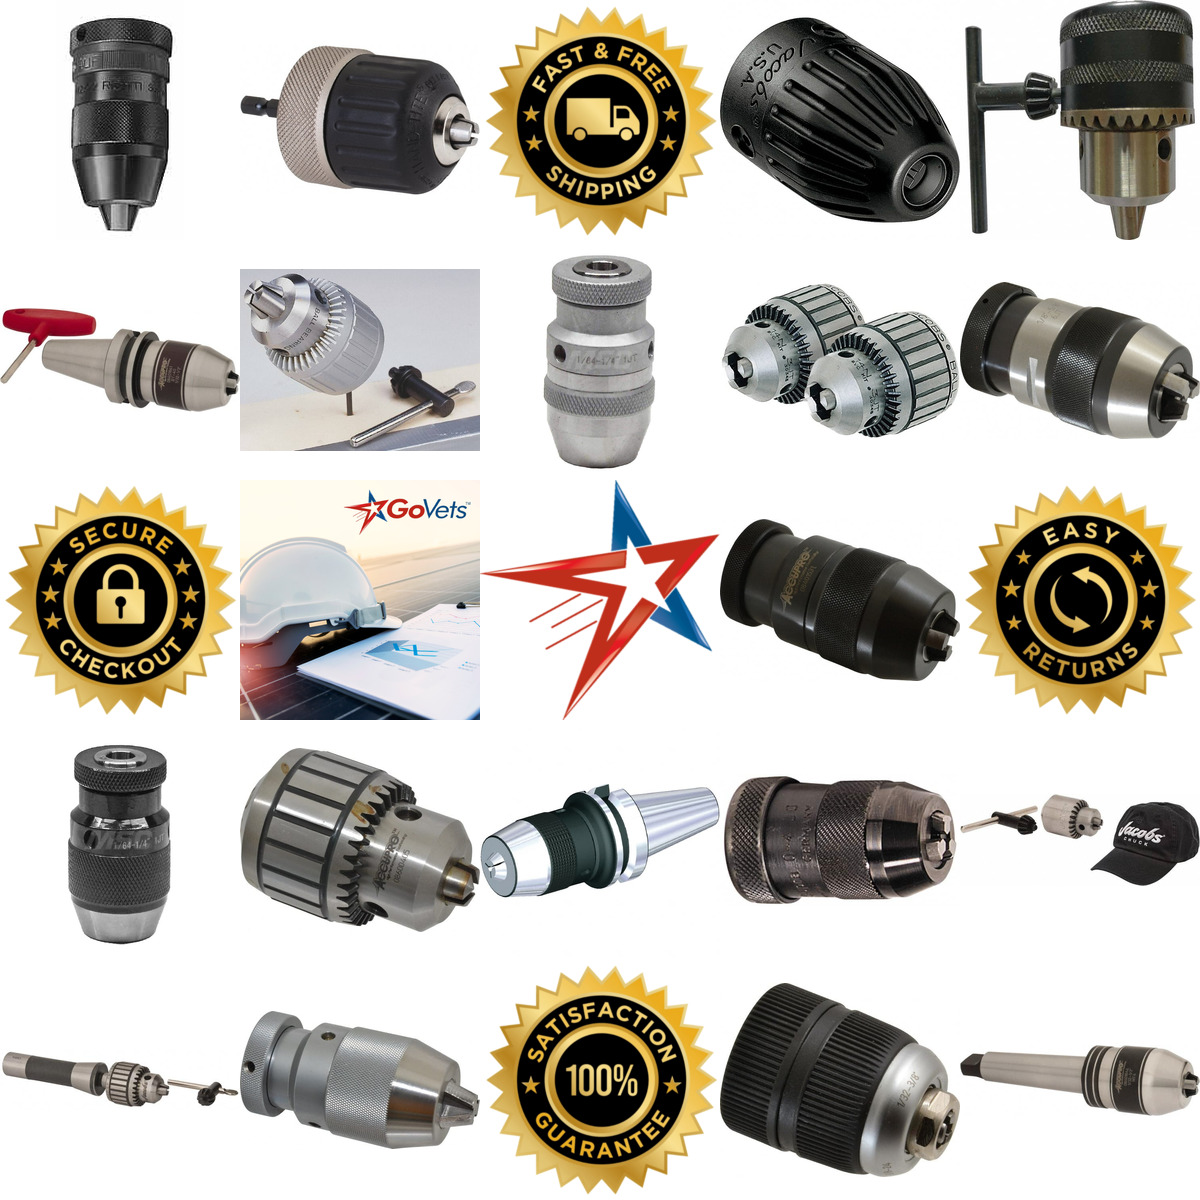 A selection of Drill Chucks products on GoVets